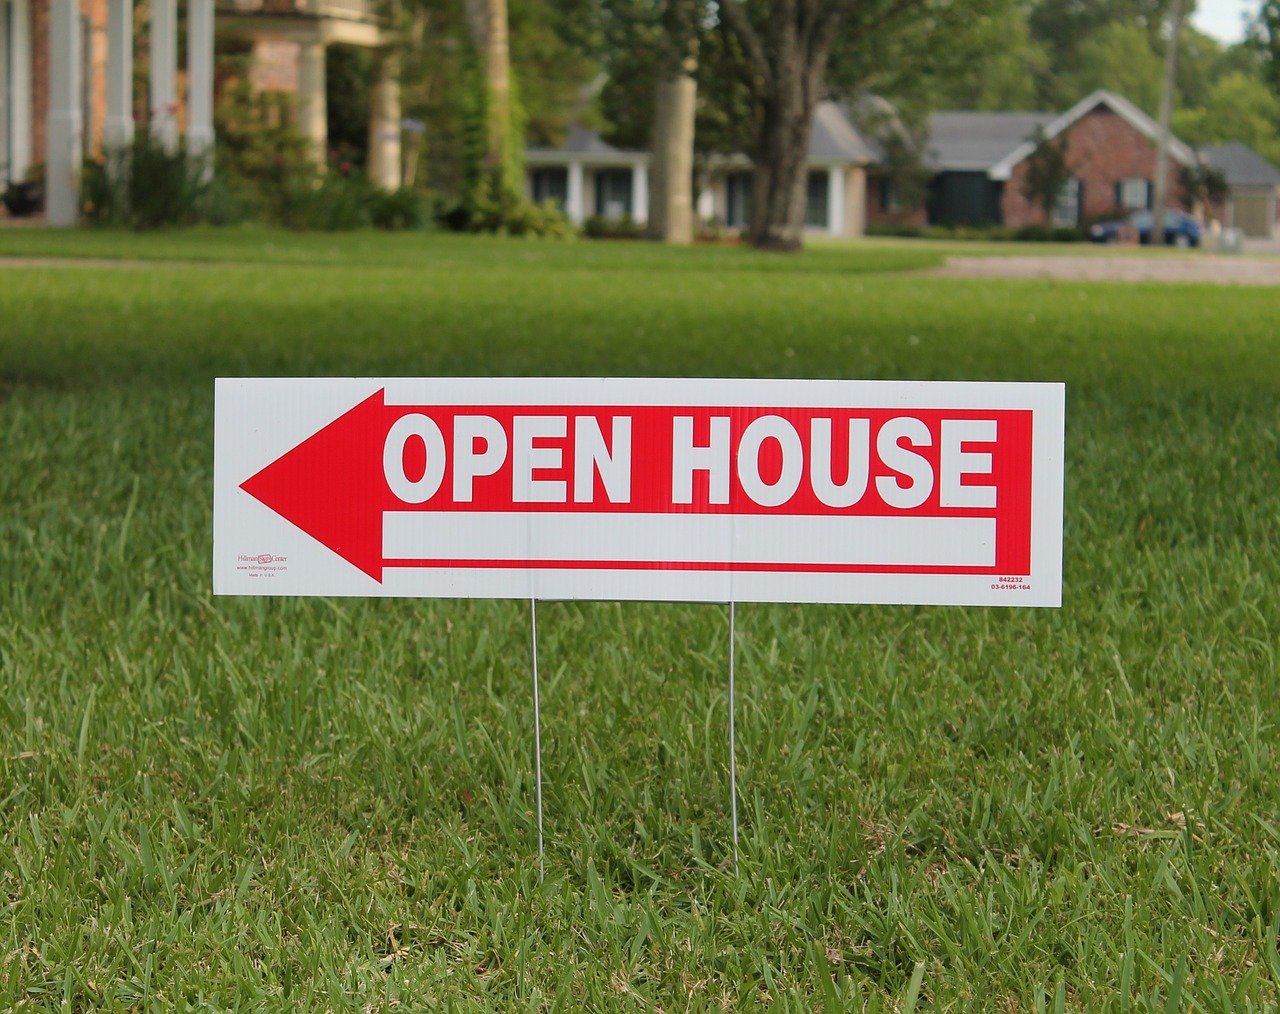 Open house lawn sign showing benefits of October 2020 housing market for buyers.